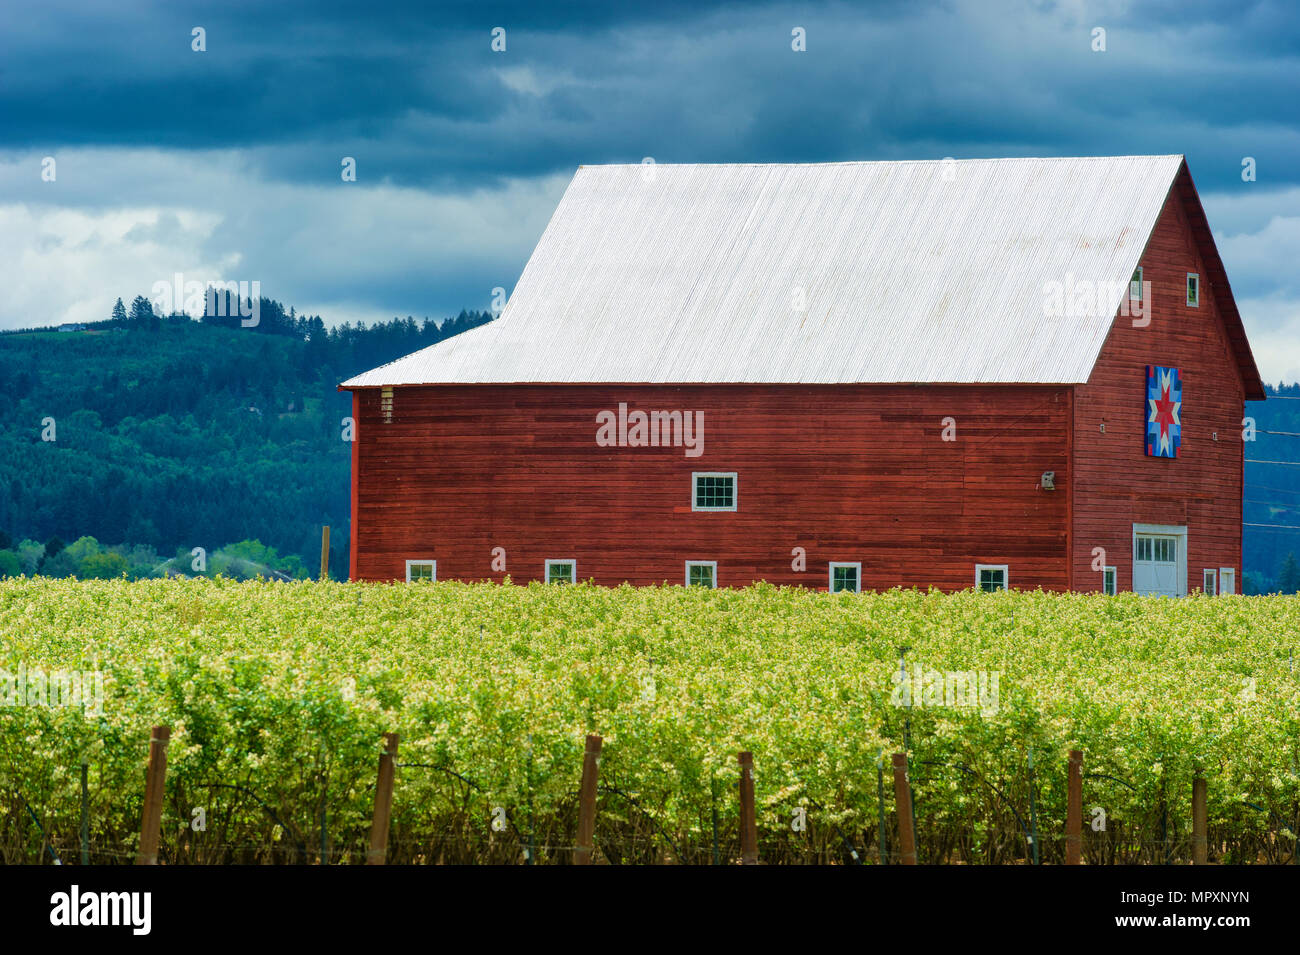 Beaverton,Oregon,USA - May 9, 2018:  Country scene with a Red barn under cloudy skies. Stock Photo